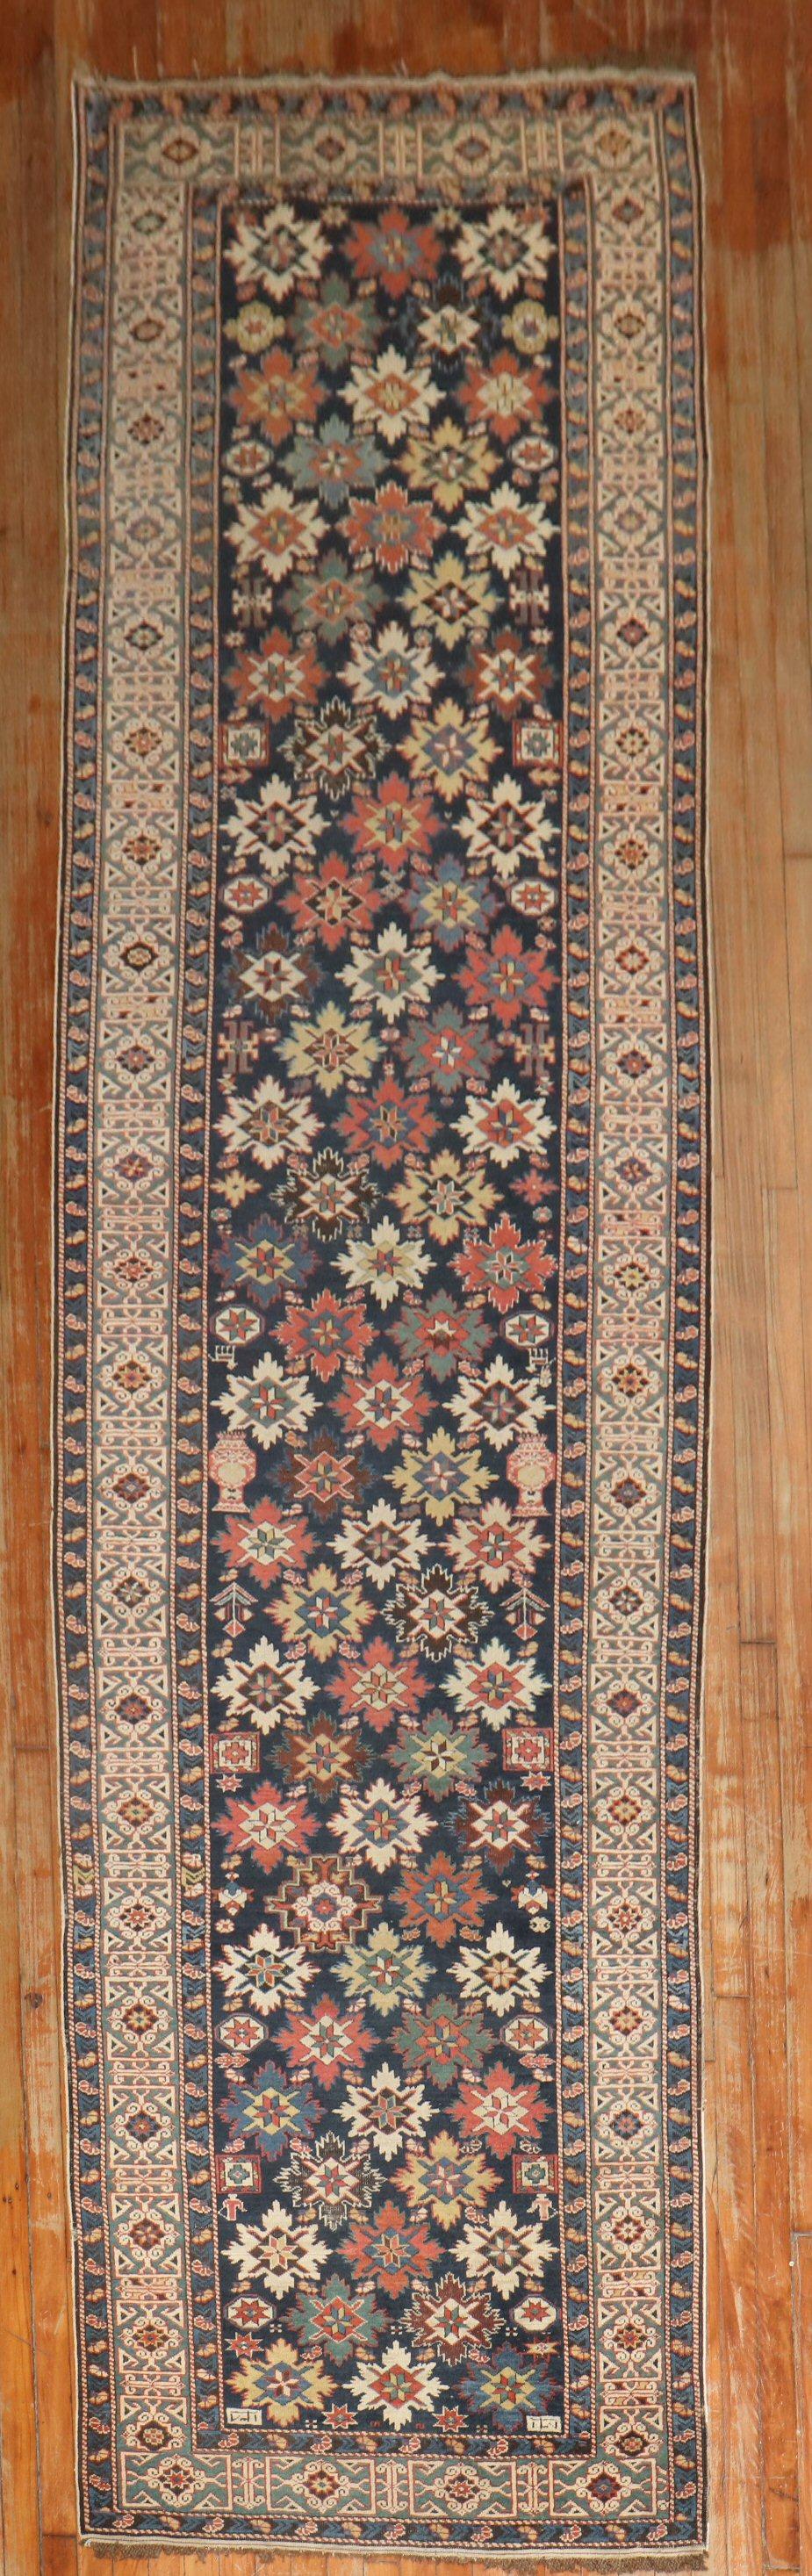 Superb antique Caucasian runner from the late 19th century with a rare all-over snowflake design.

Measures: 3'6